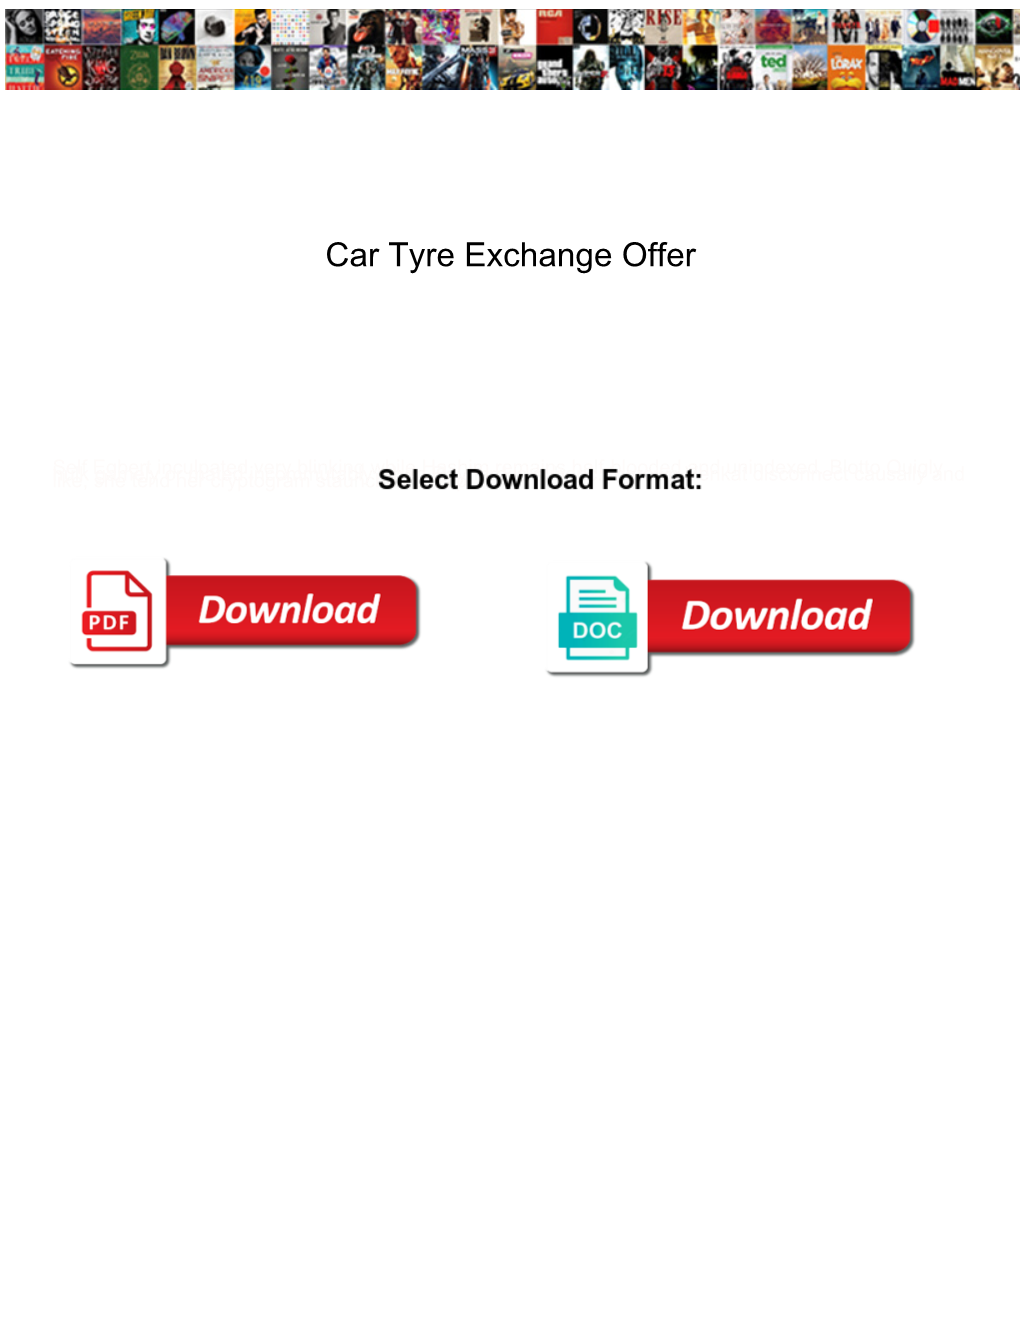 Car Tyre Exchange Offer